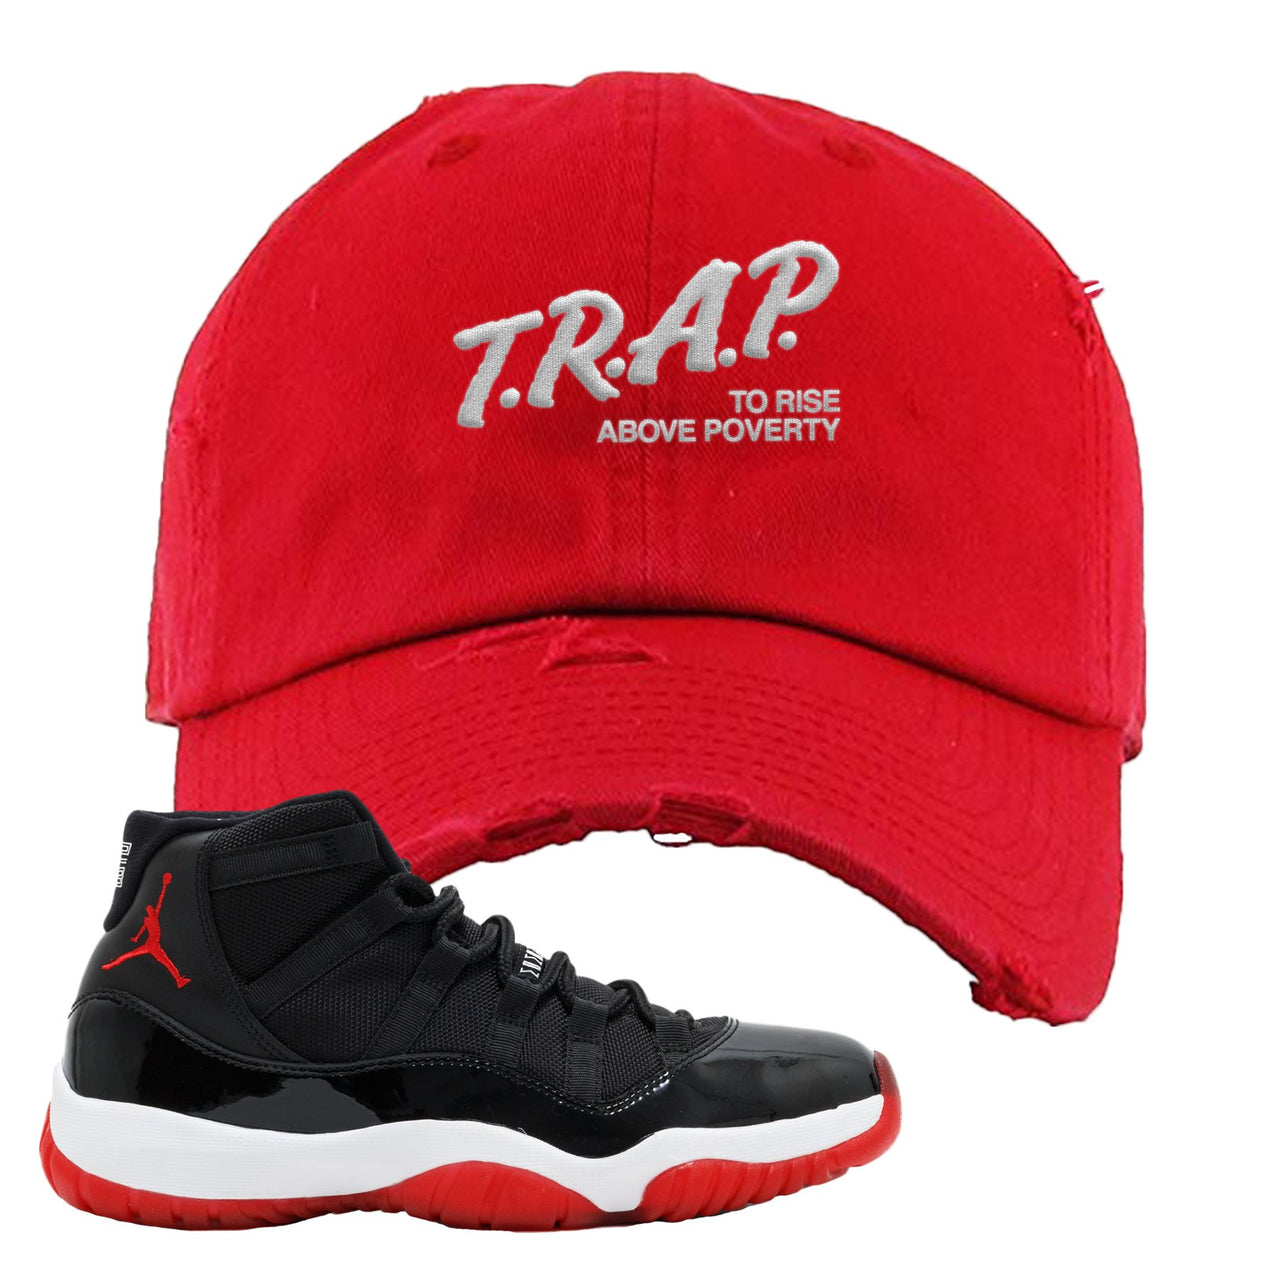 Jordan 11 Bred Trap To Rise Above Poverty Red Sneaker Hook Up Dad Hat